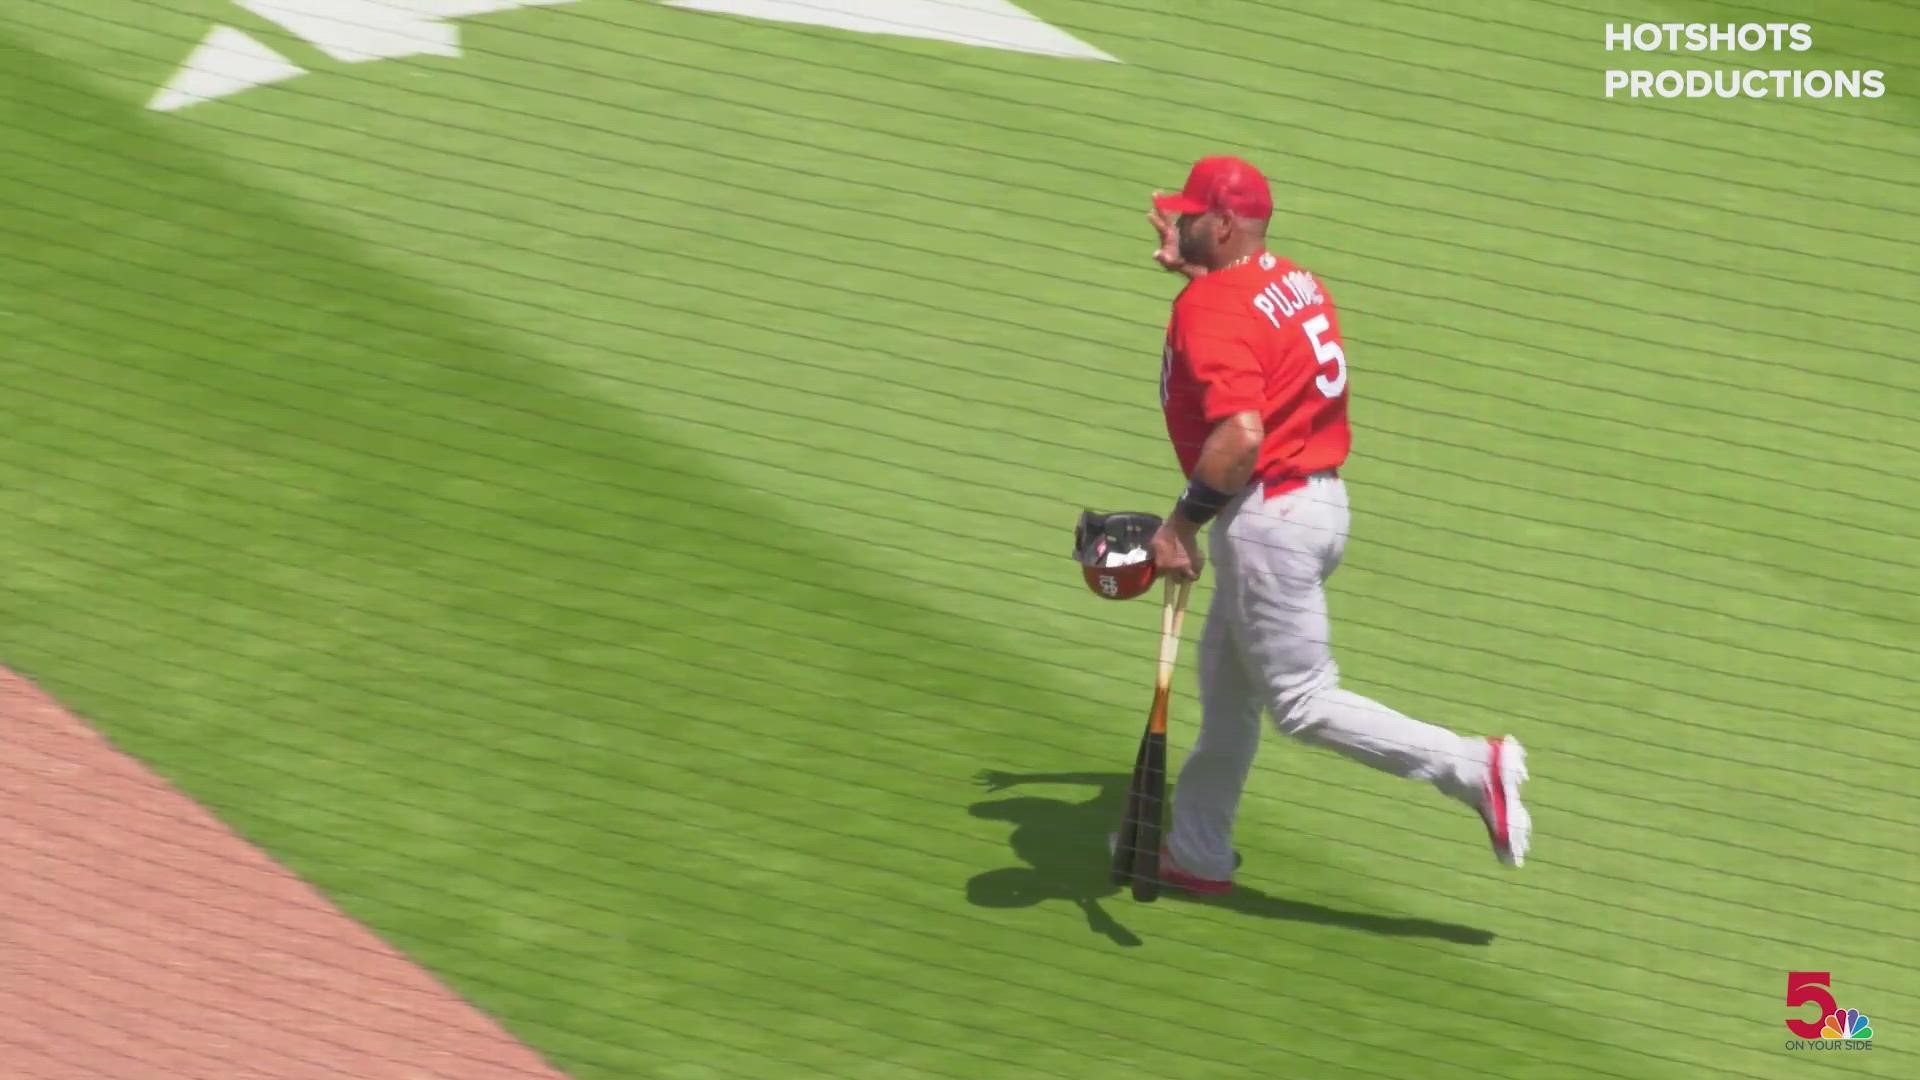 Video: Pujols singles in return to Cardinals at spring training